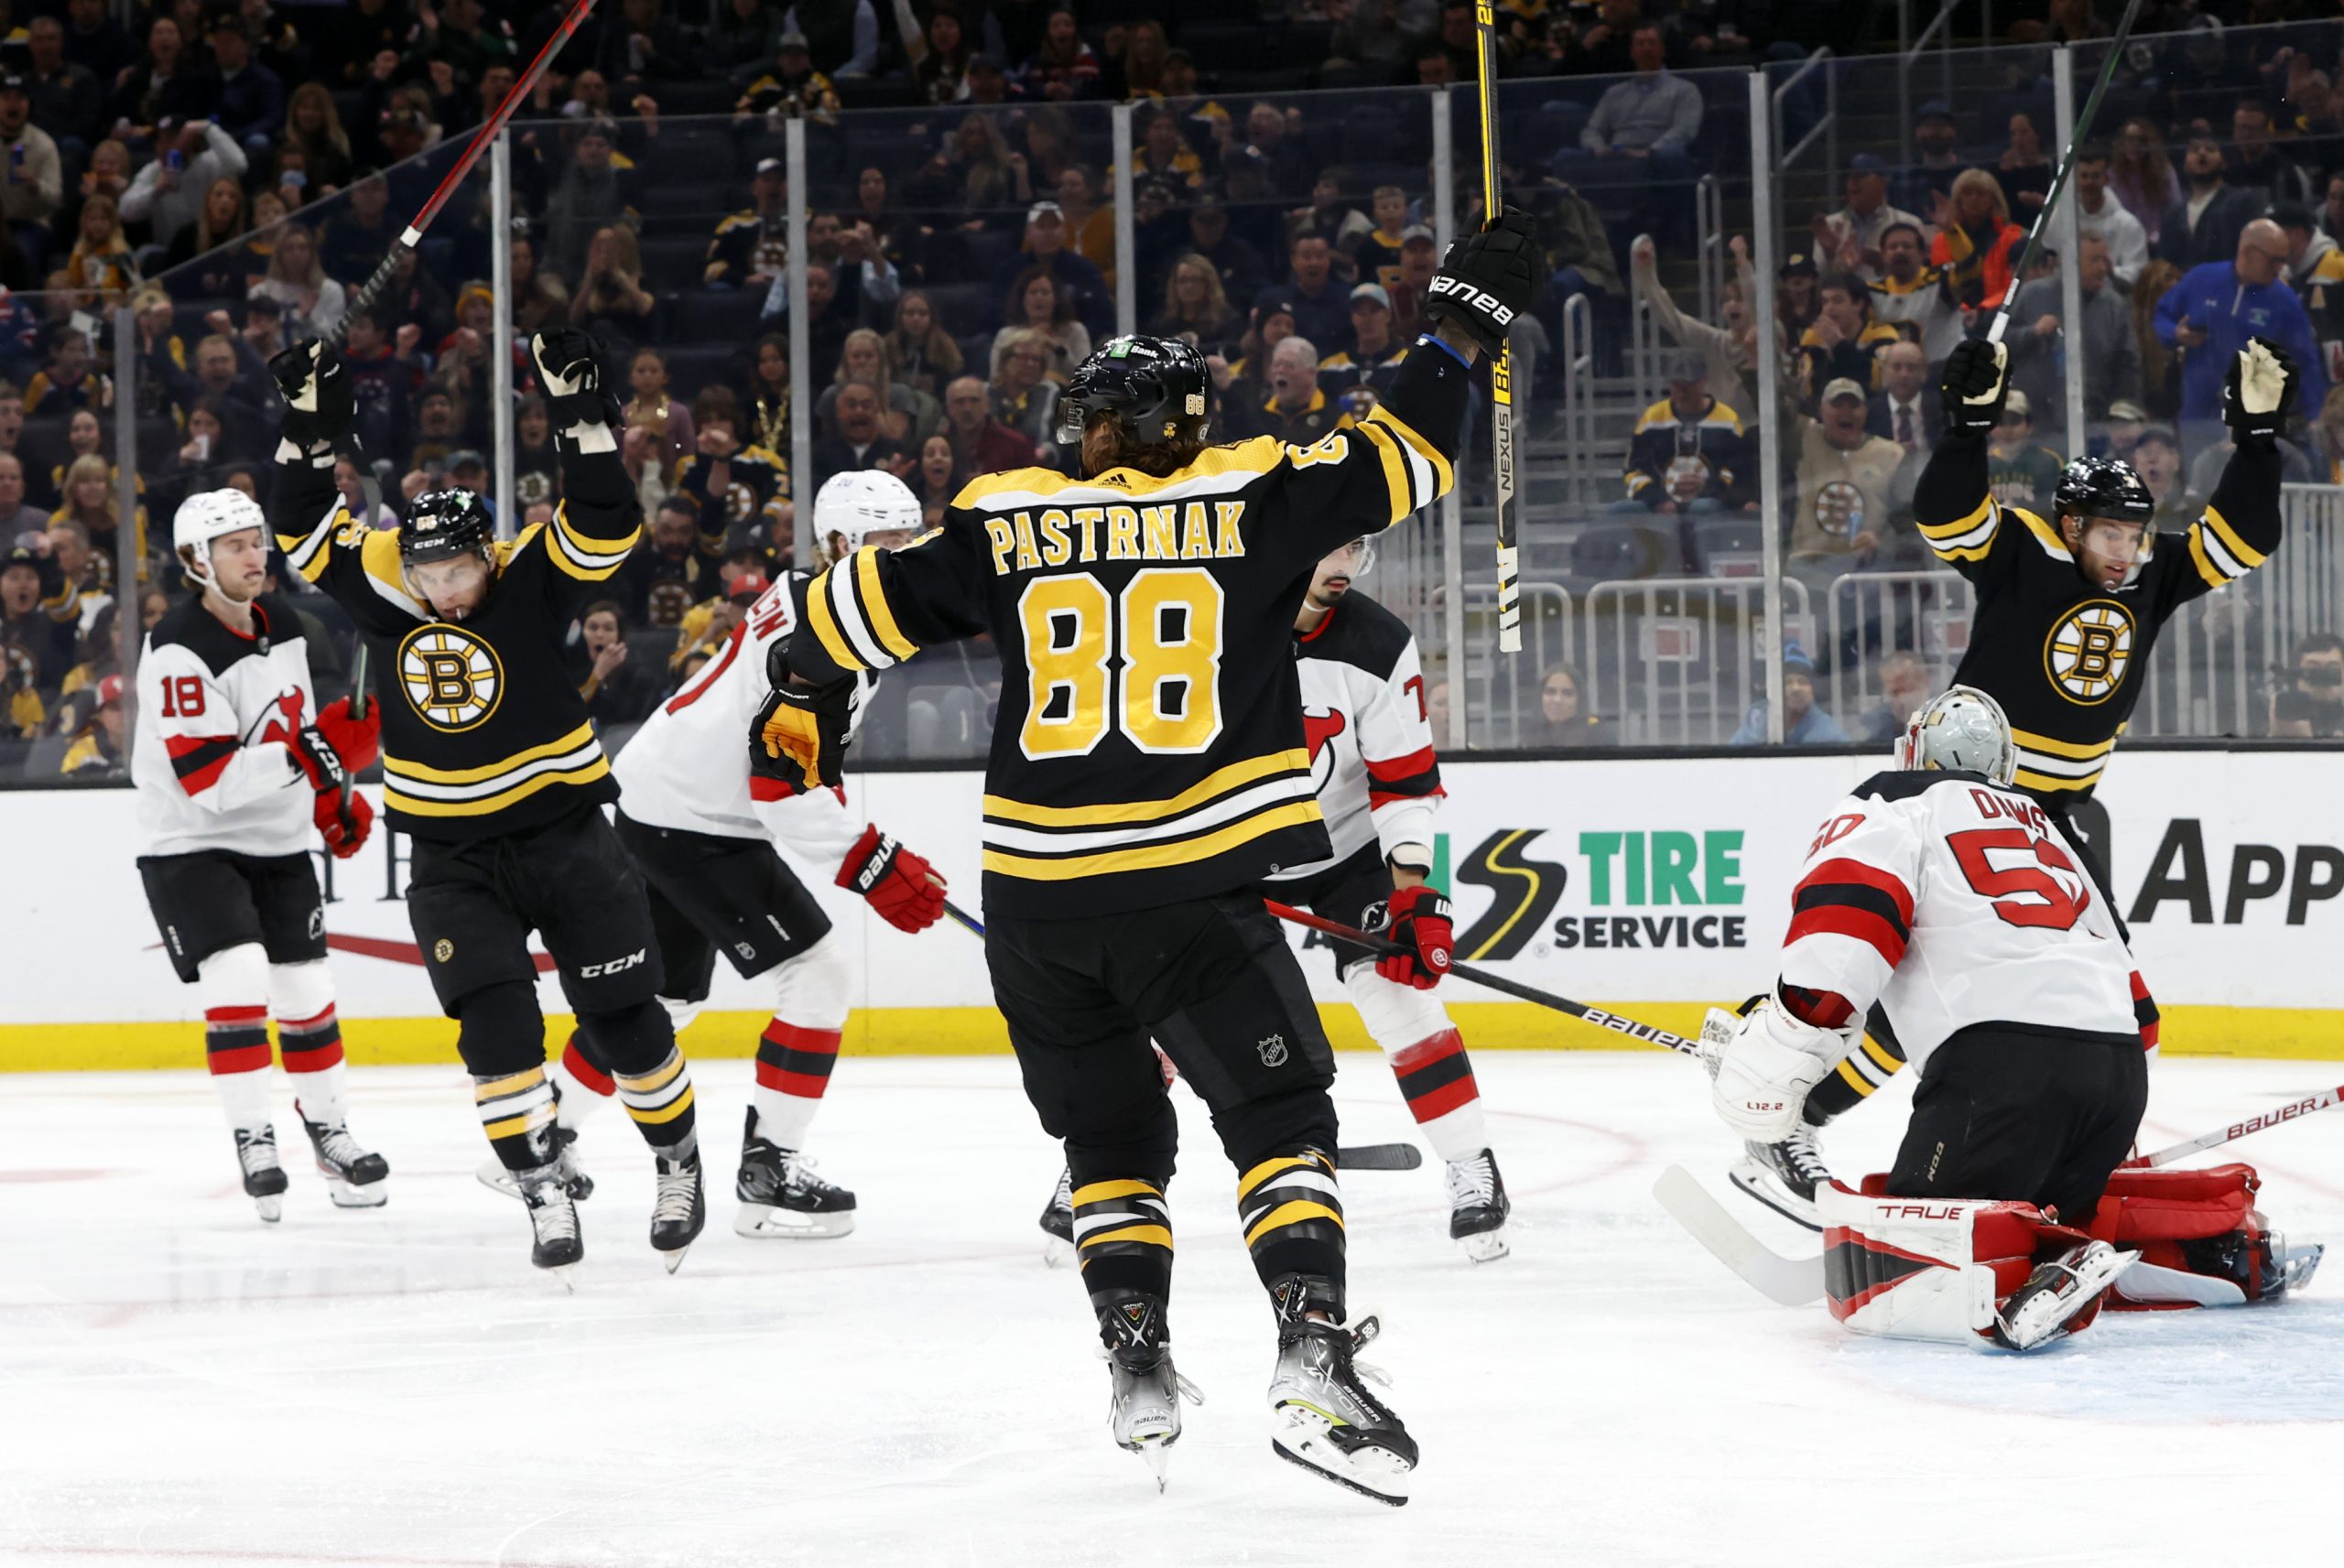 Newcomers sure make Don Sweeney look good, and the Bruins beat the